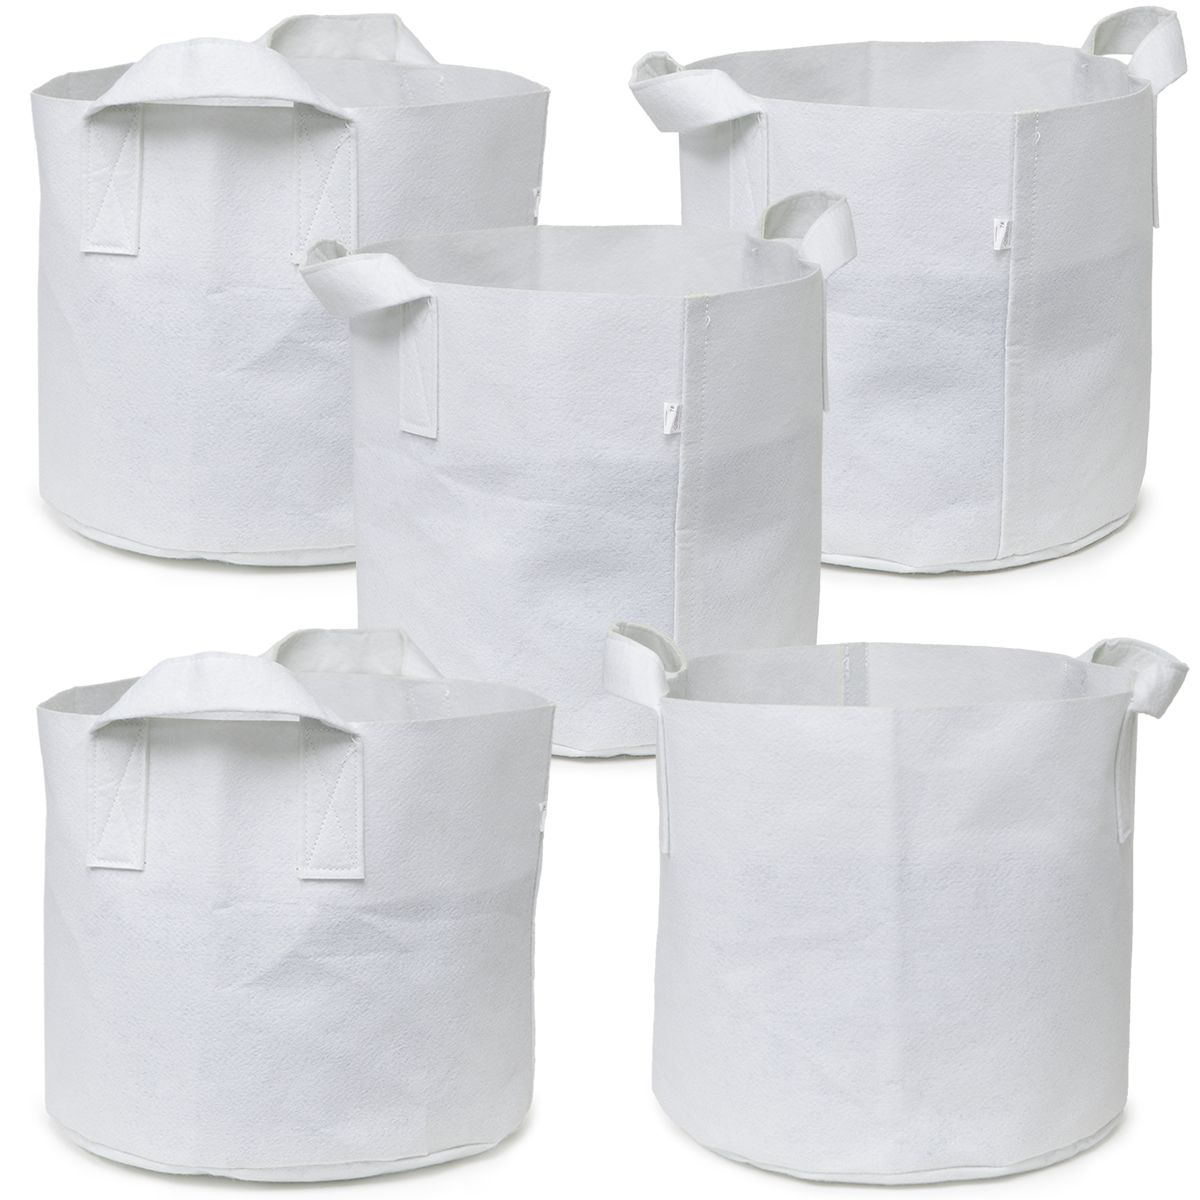 Details about   5 Pack Grow Bags Fabric Pots Root Pouch w/Handles Planting Container 1-7 Gallon 